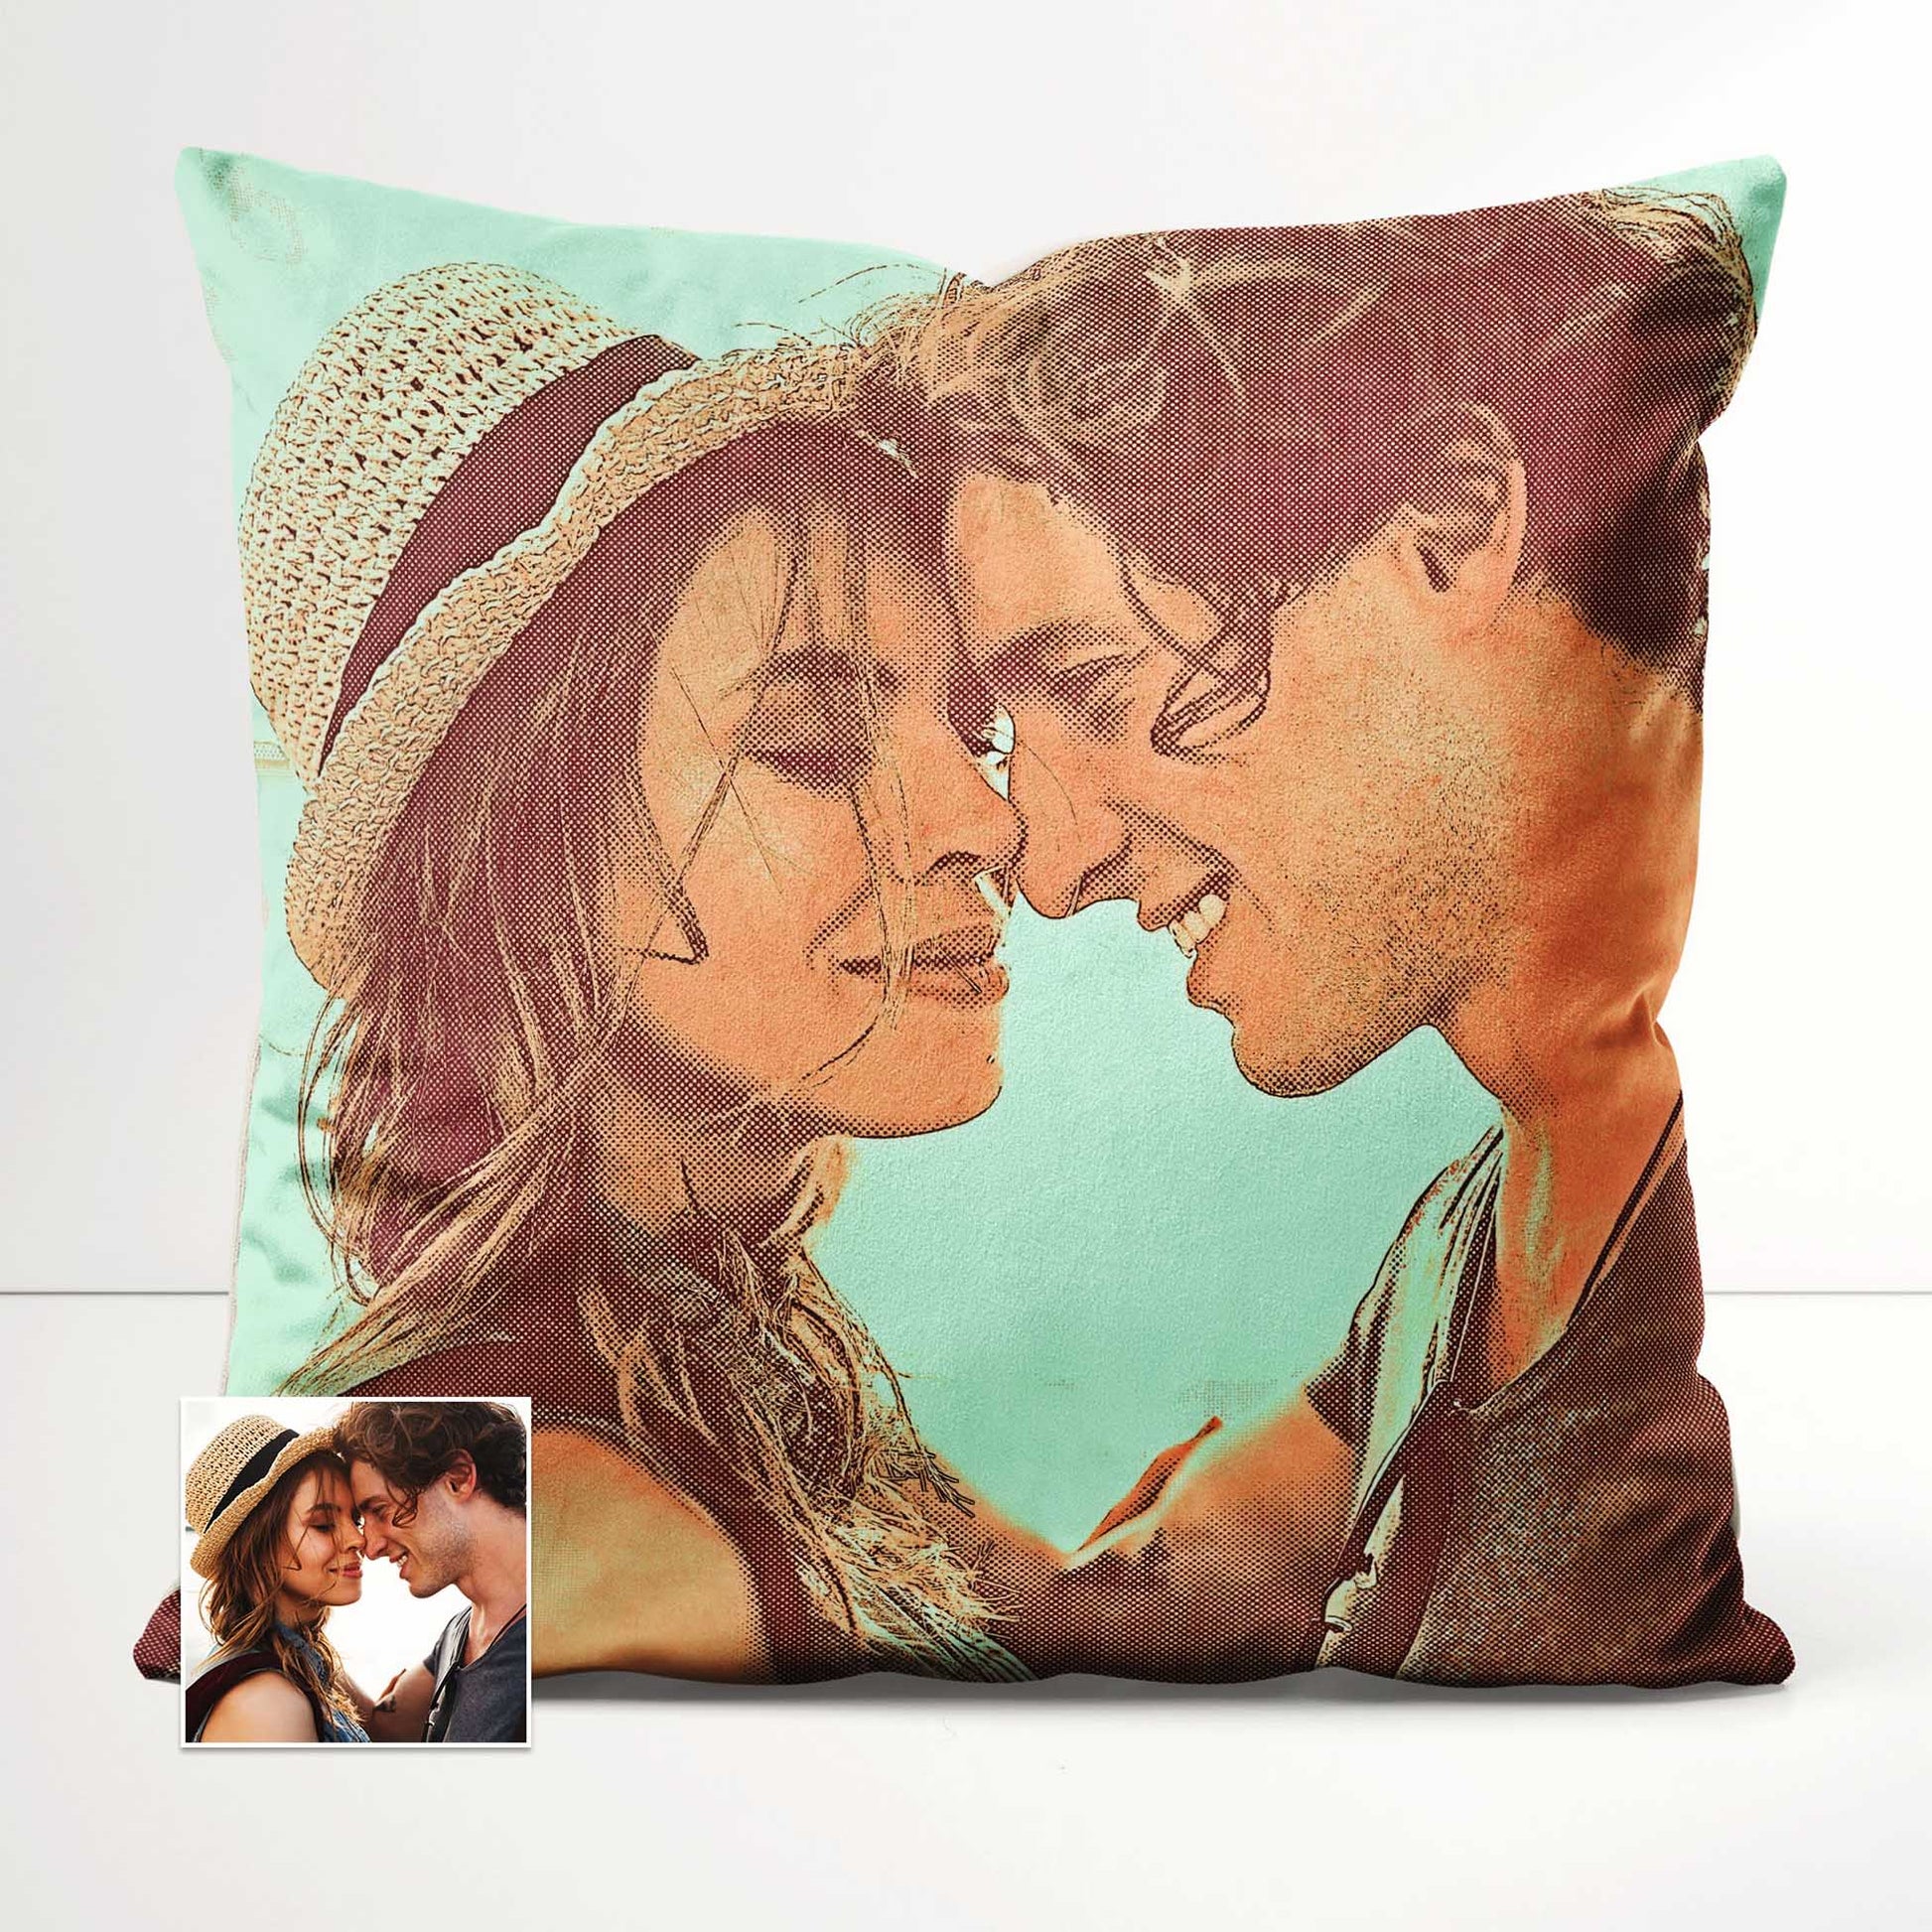 Add a burst of freshness to your home with the Personalised Orange and Green Cushion. This custom-designed cushion showcases a digital art print created from your chosen photo, bringing a trendy and modern aesthetic to your interior